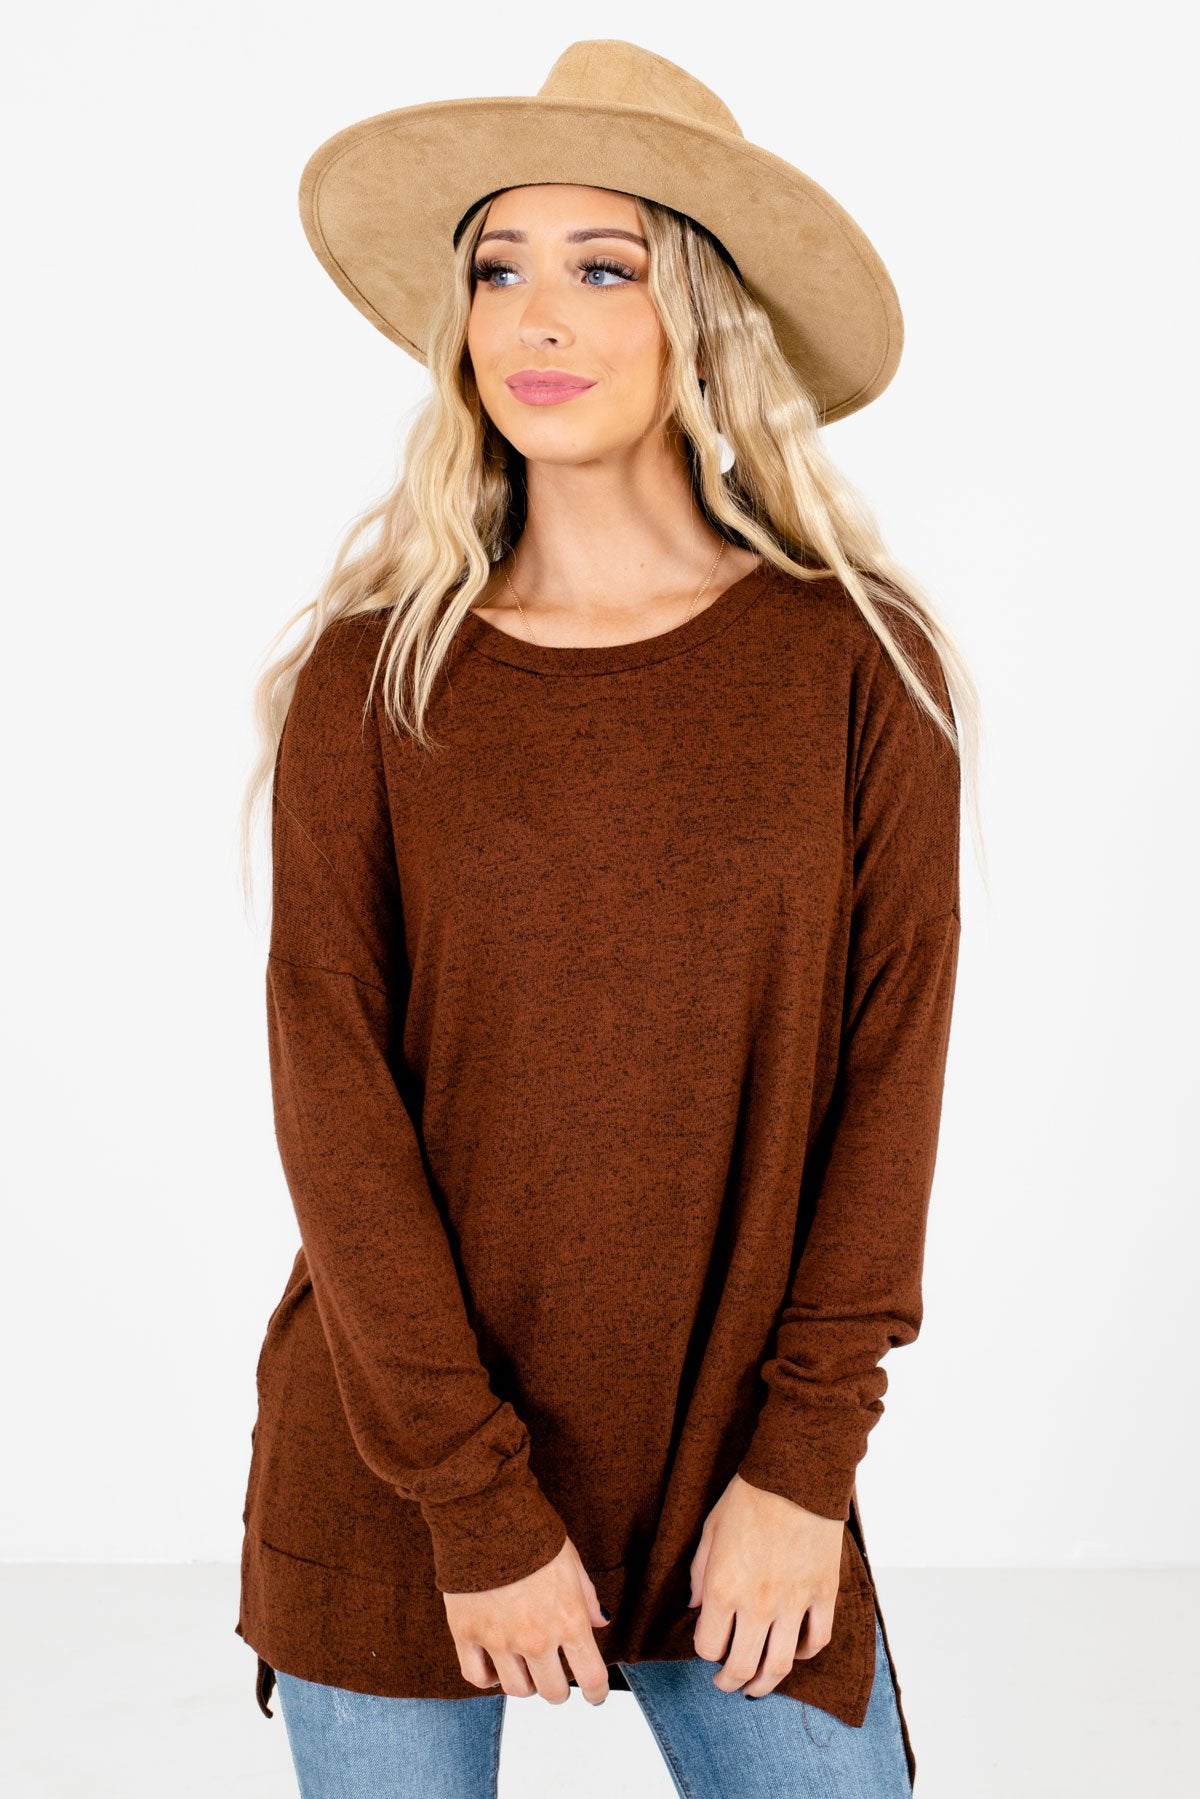 Women’s Brown Long Sleeve Boutique Tops